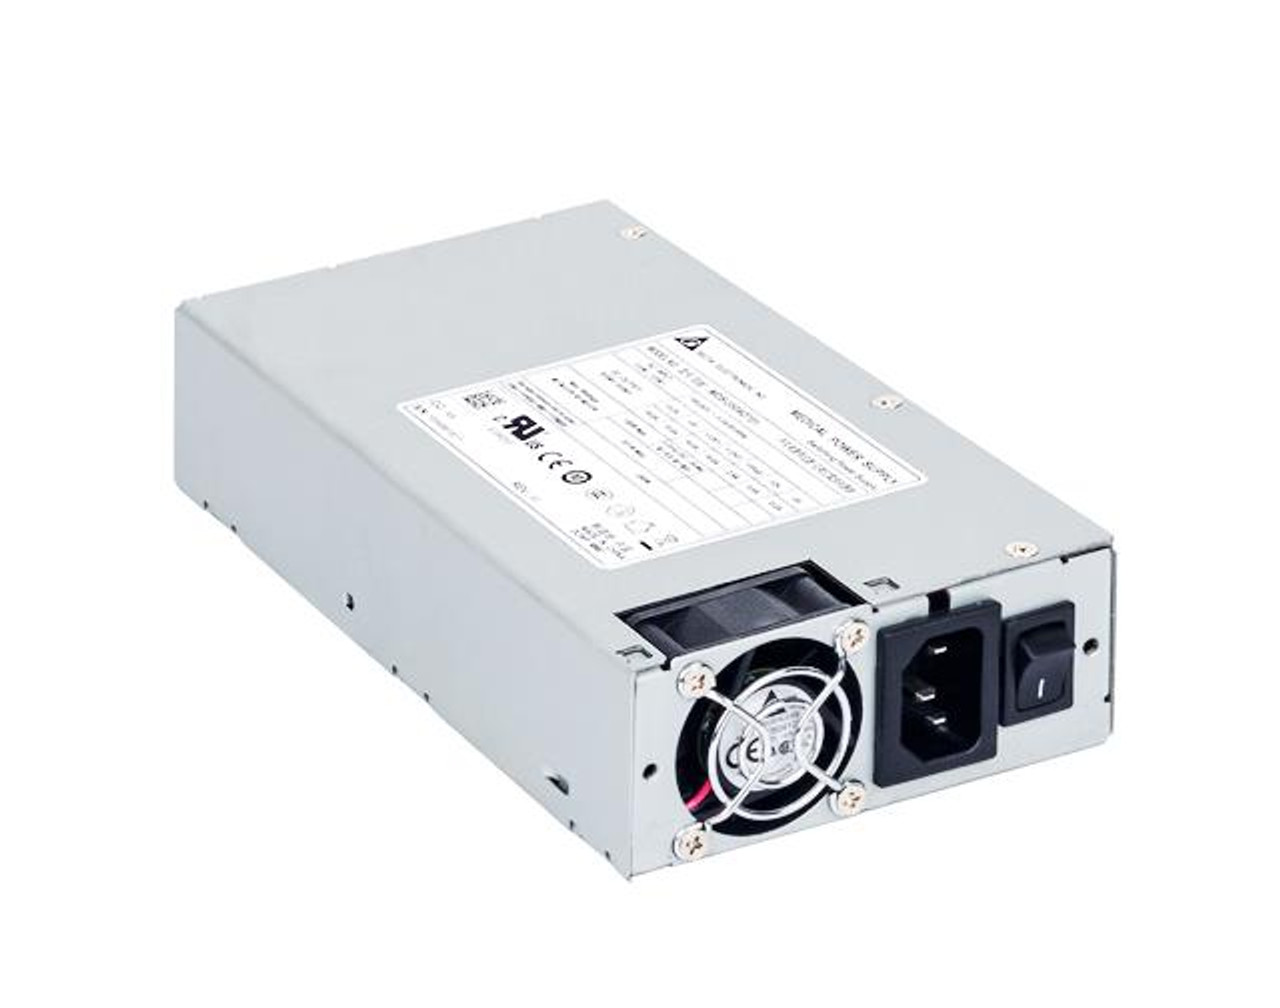 MDS-350AD701AA Delta Electronics 350-Watt ATX Form Factor Switching Power Supply MDS-350AD701